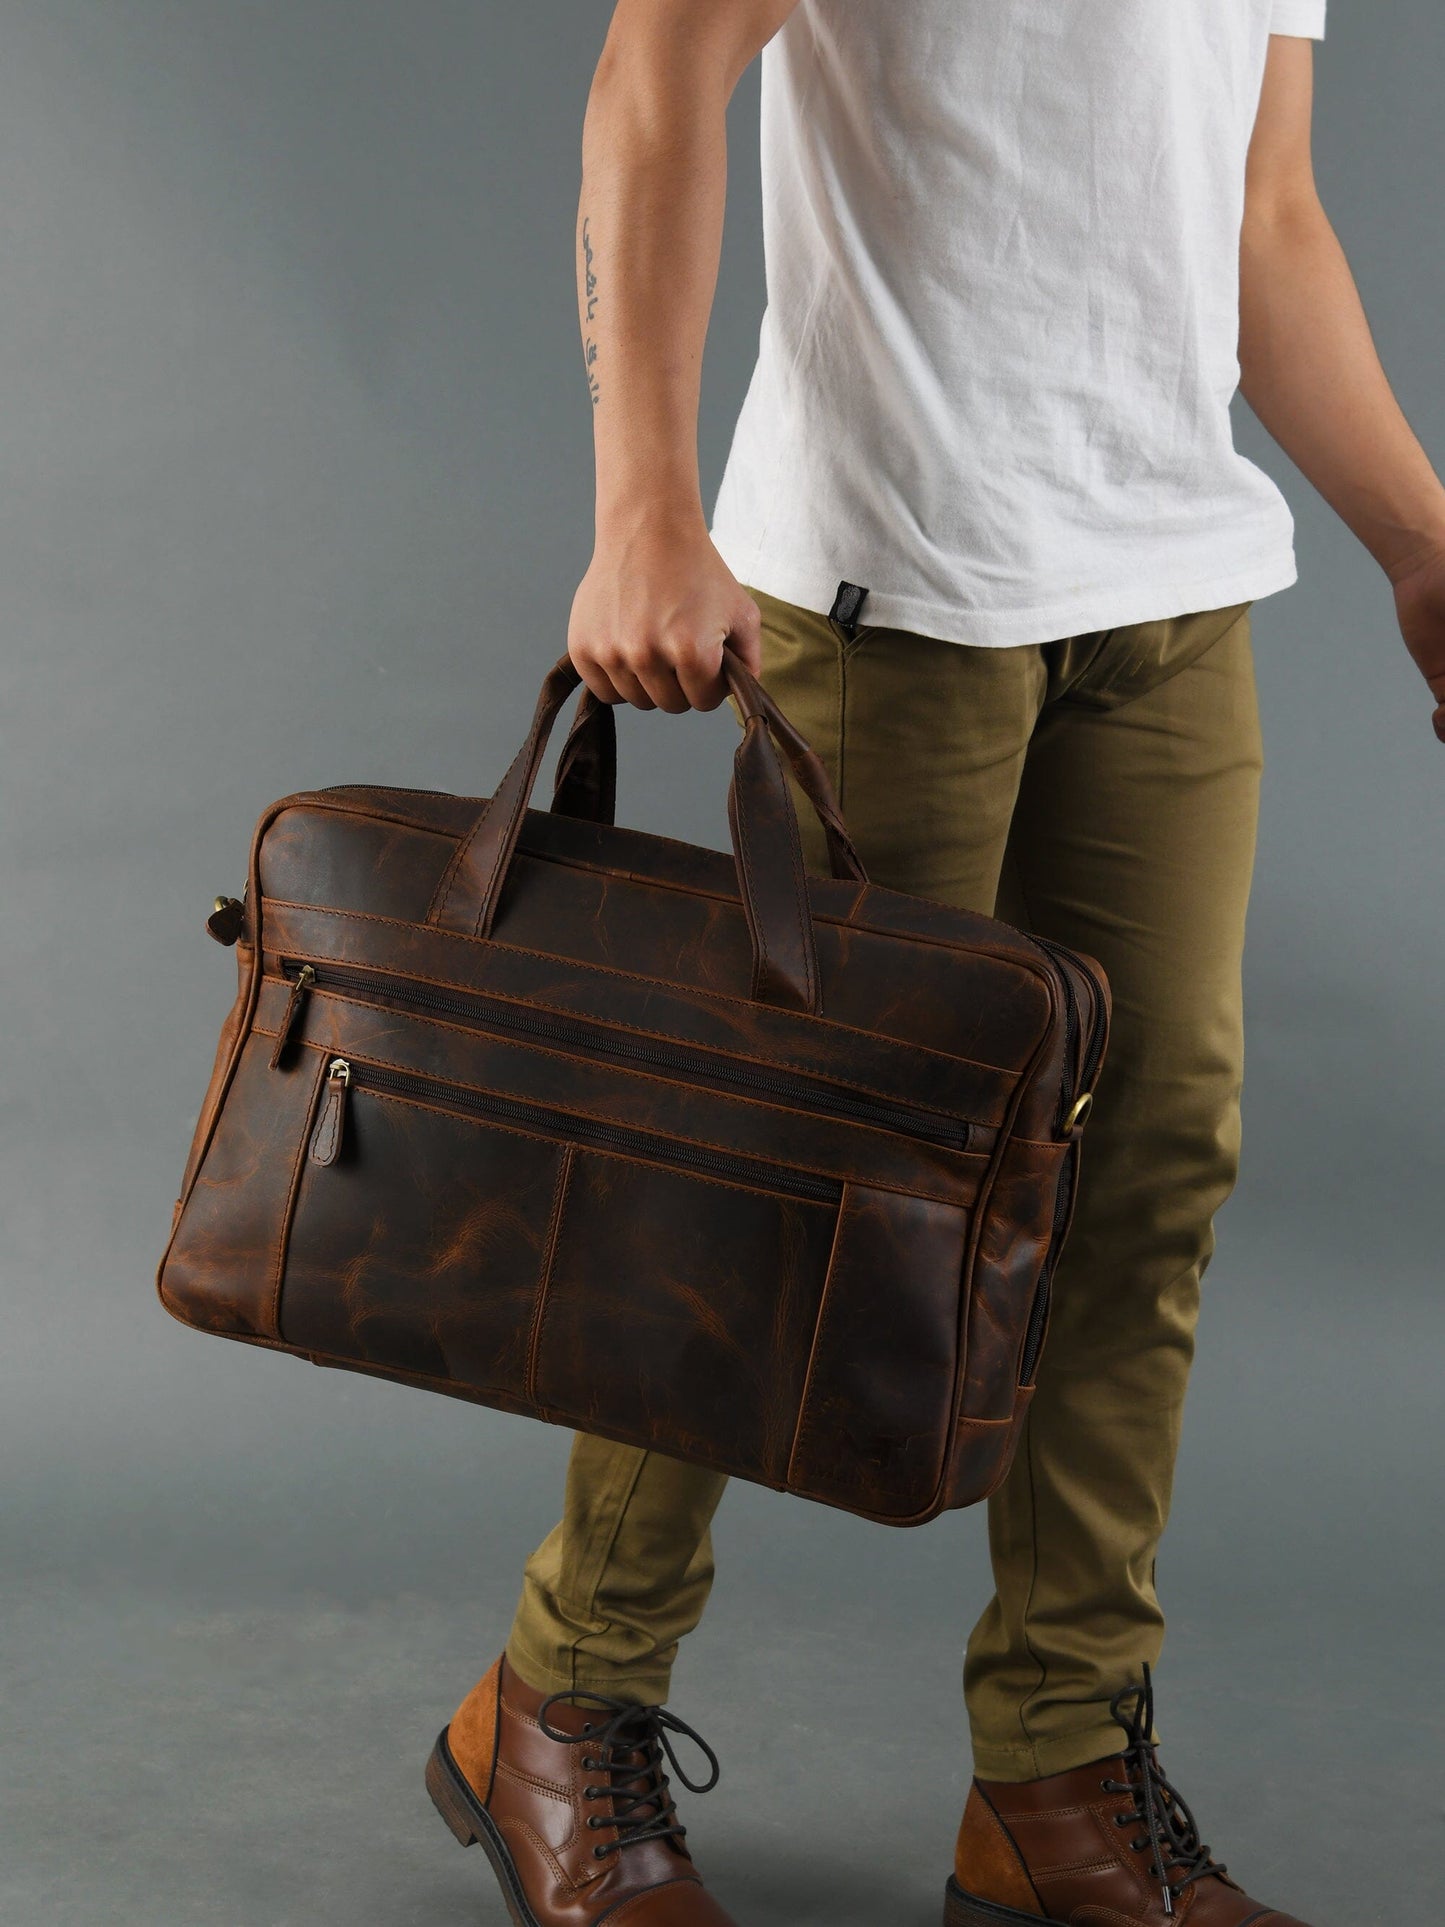 The Brooklyn - Leather Briefcase - The Tool Store